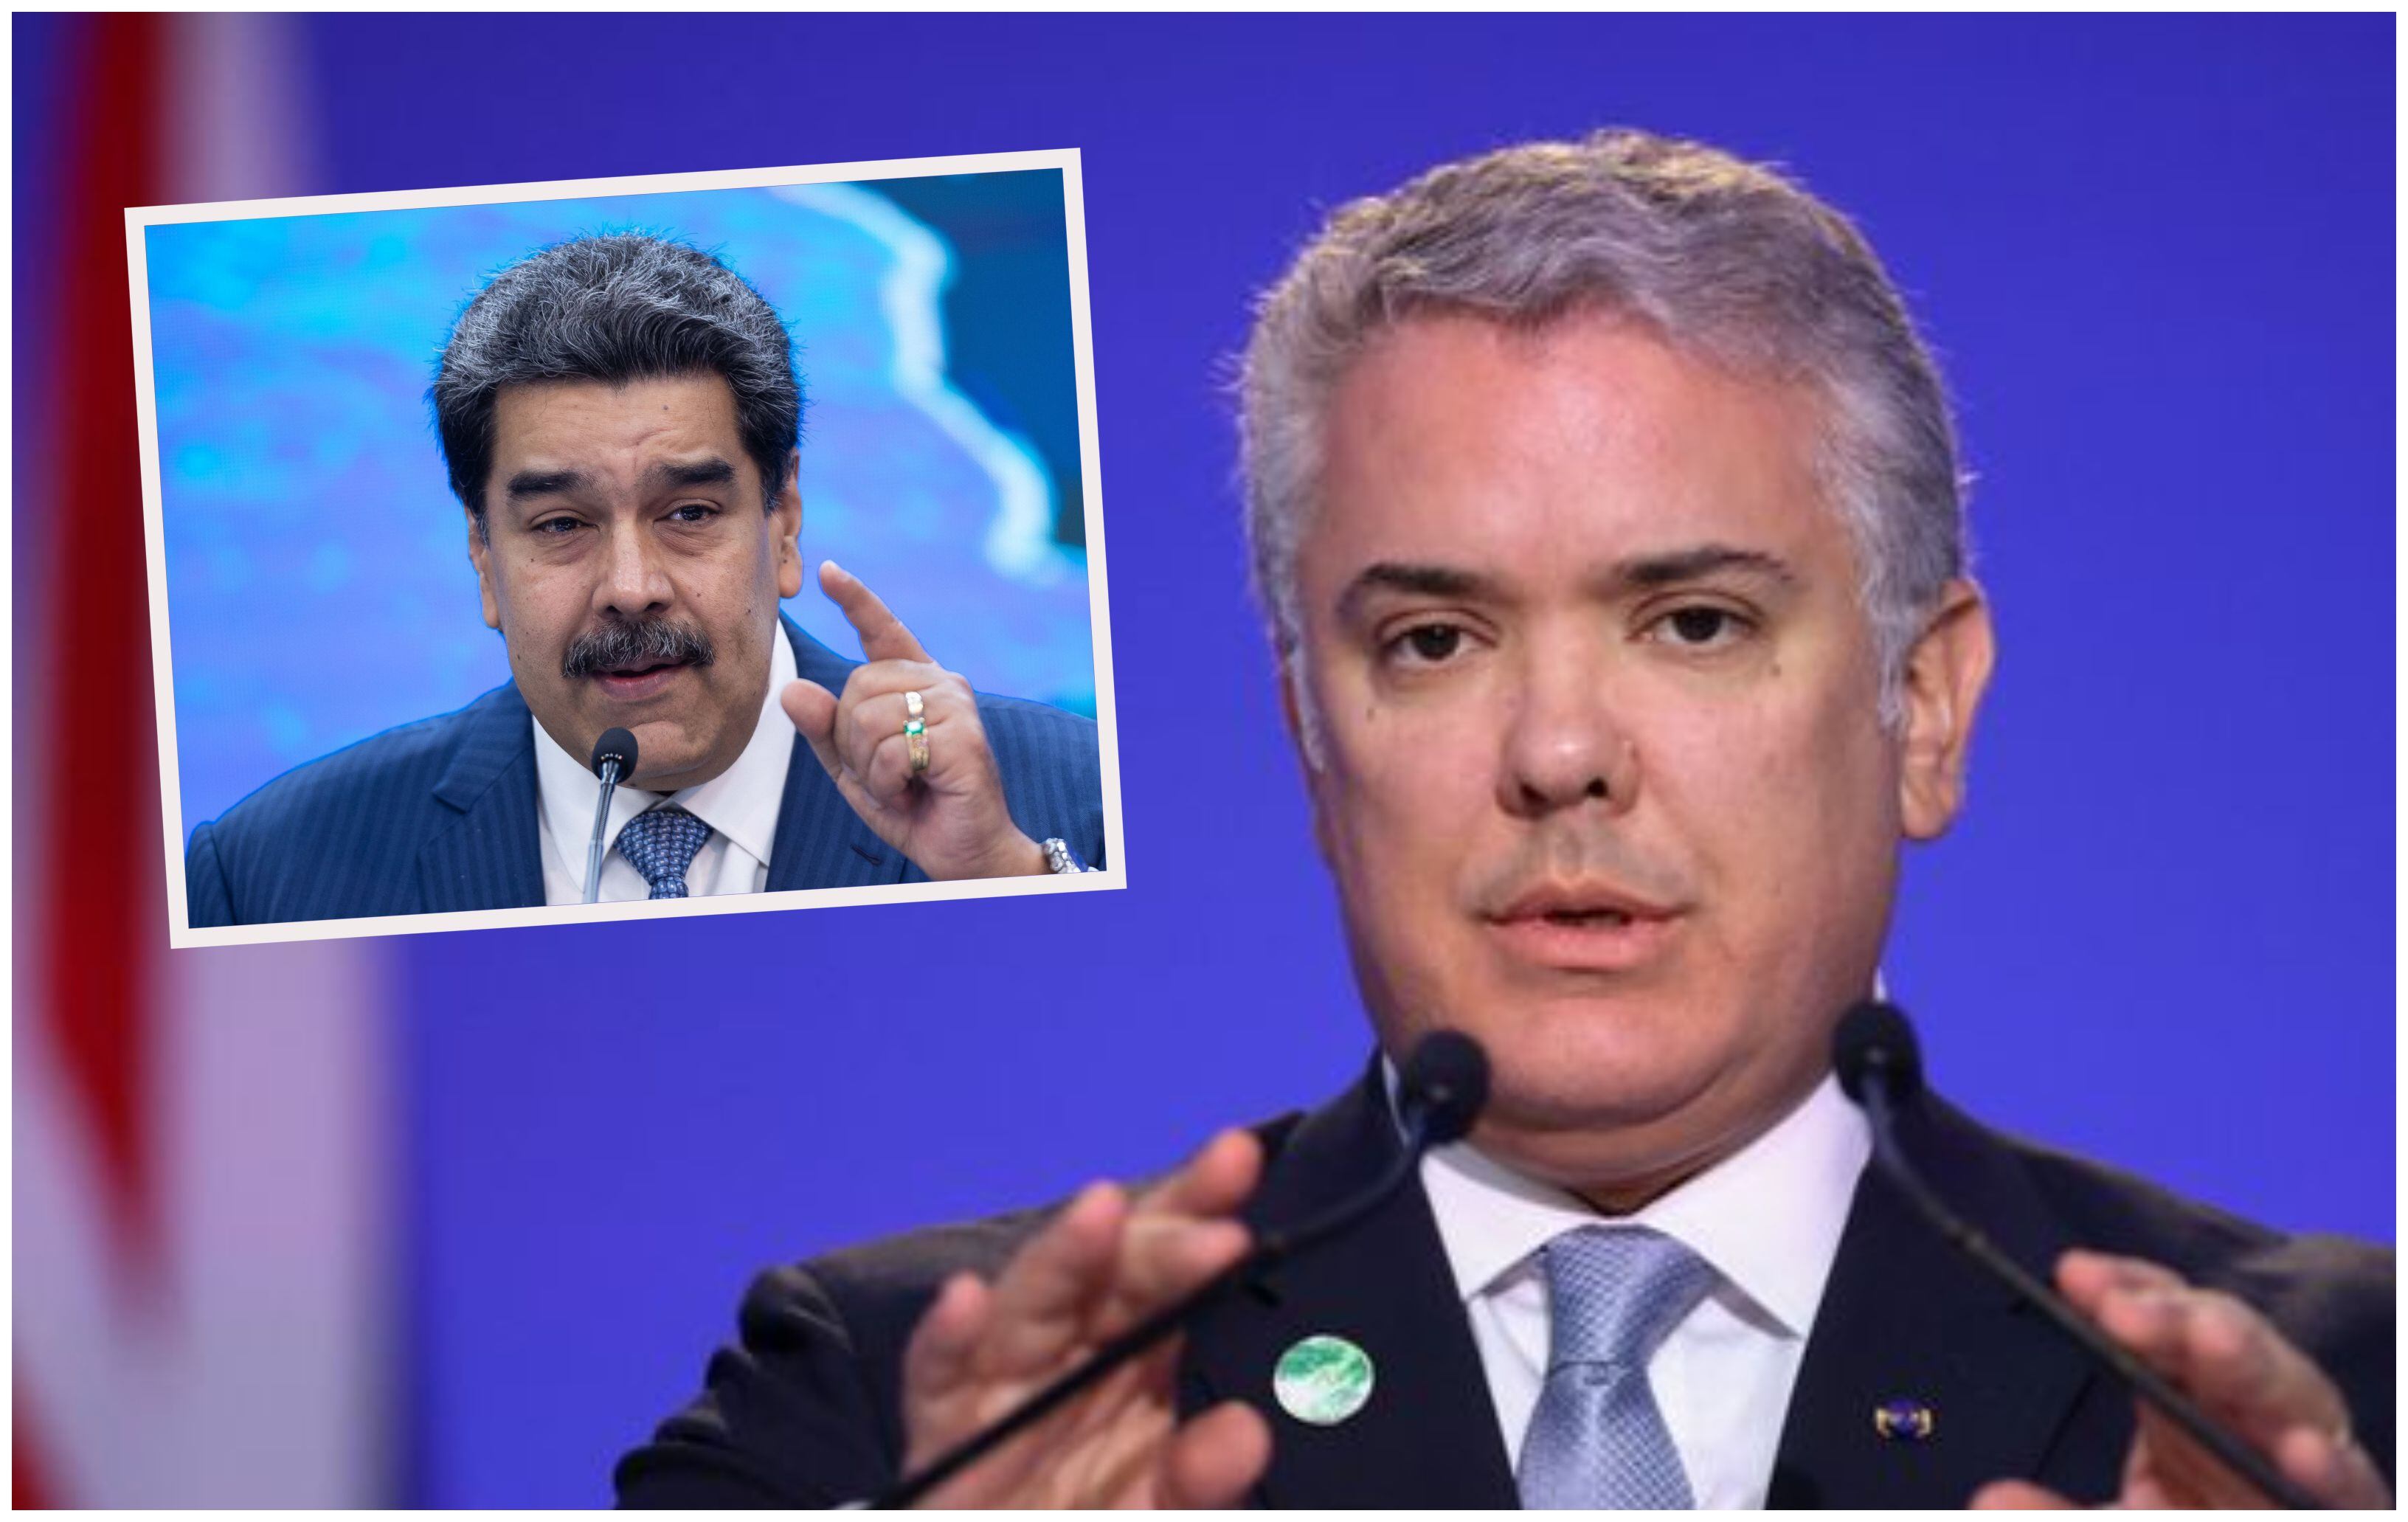 Iván Duque questioned the possibility of opening talks with Venezuela while Maduro is in power.  Photos: REUTERS (Hannah McKay) / EFE (Rayner Peña)